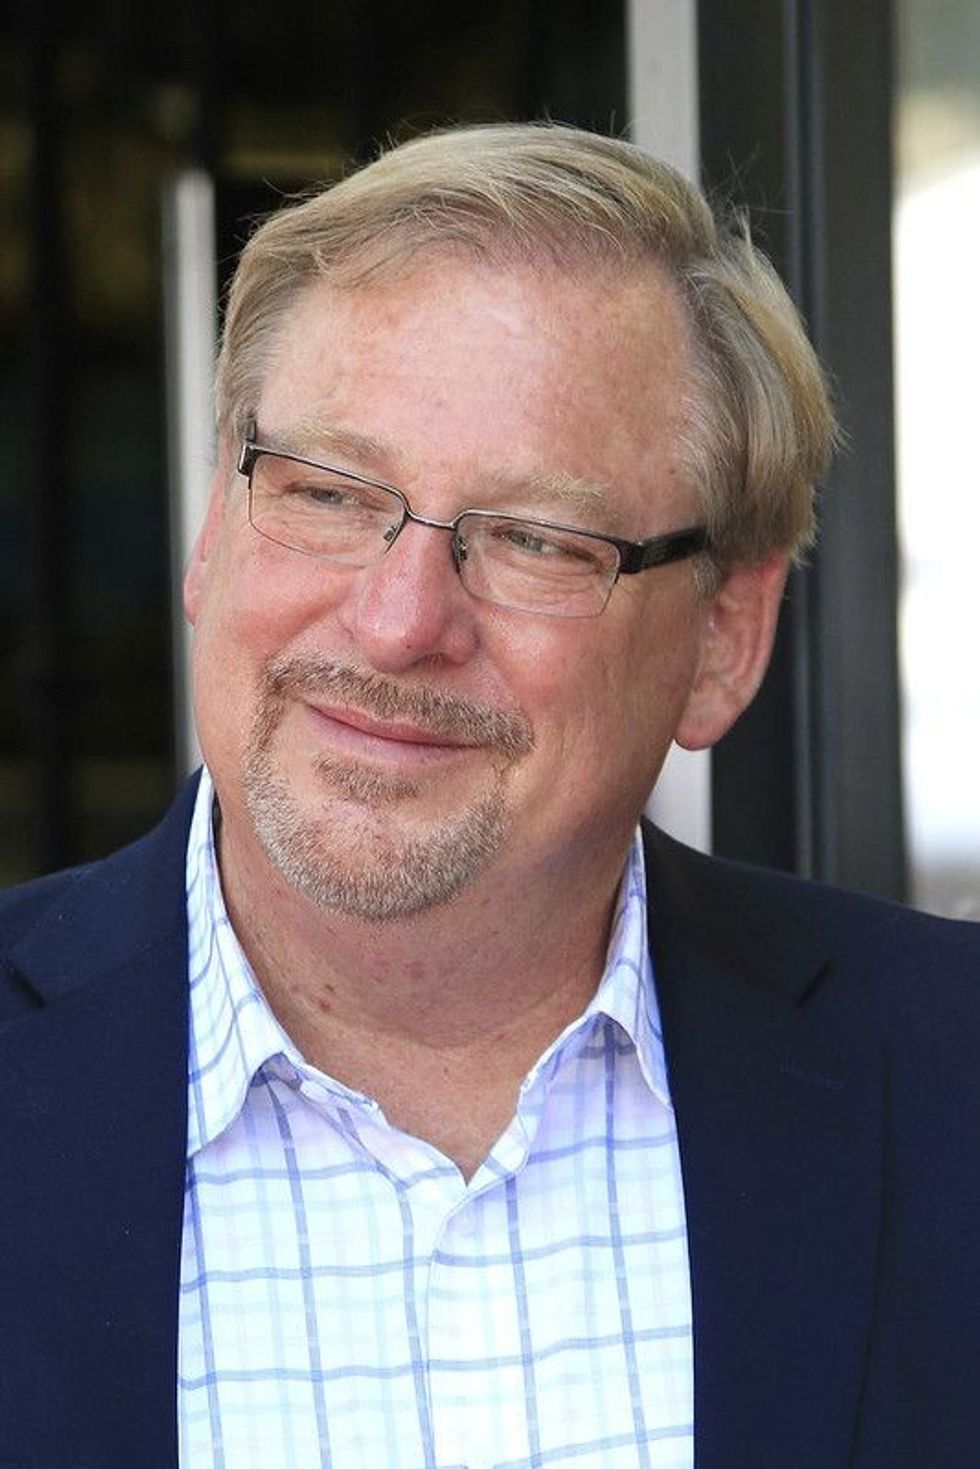 Discover some awesome Rick Warren quotes in this article.